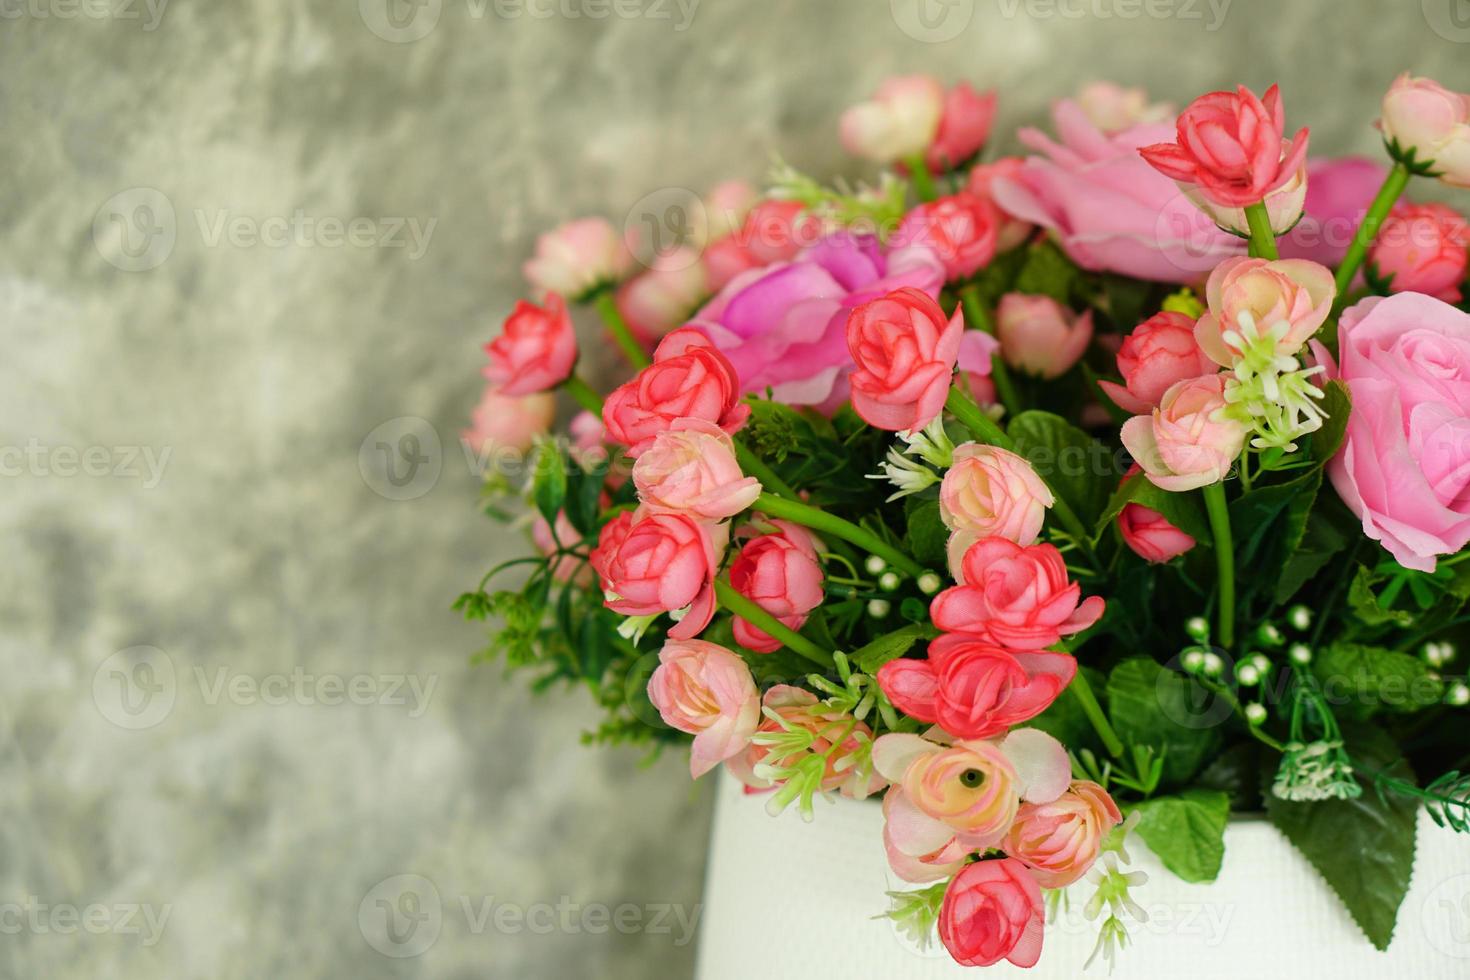 roses in pots cement wall background photo